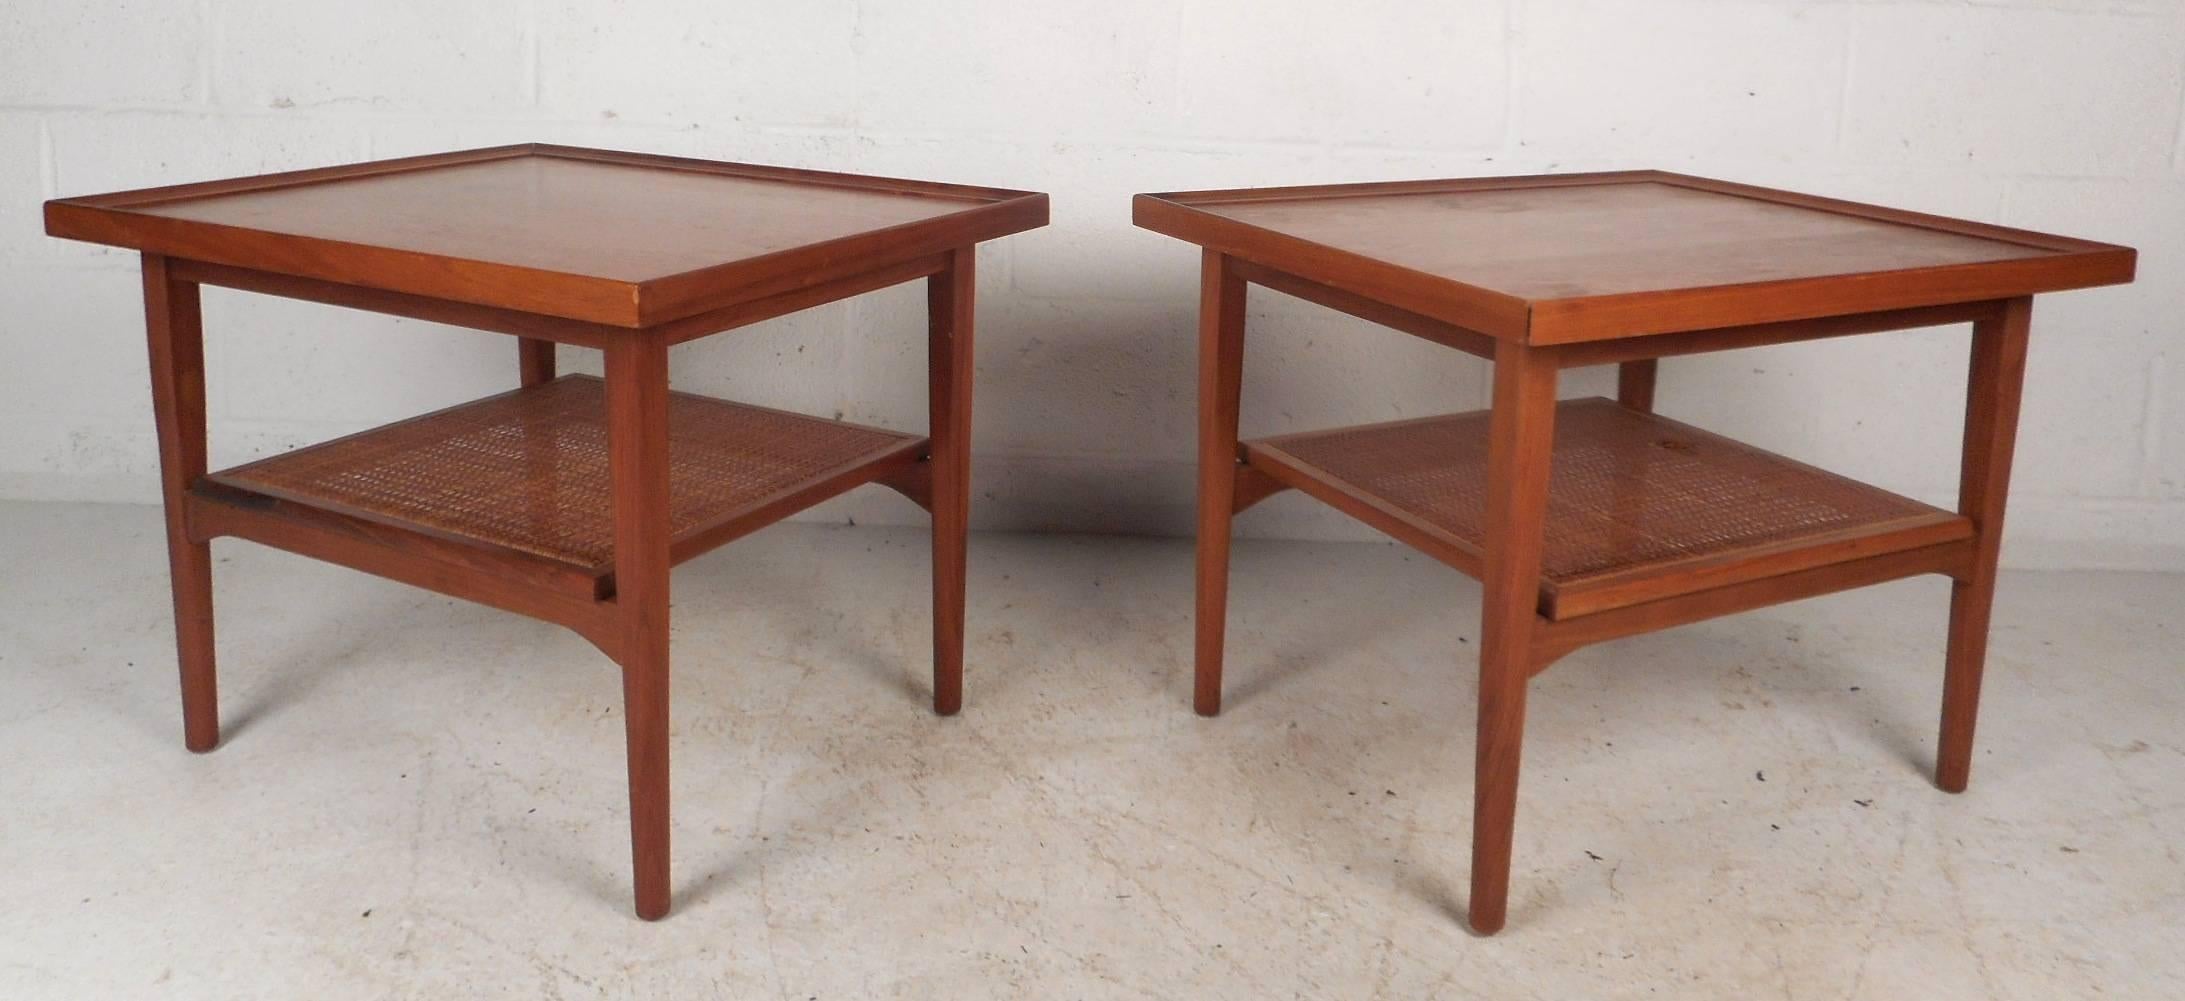 Stunning pair of vintage modern side tables feature two tiers to store and set items on. Unique design has raised edges along the tabletop and a stylish lower cane shelf. Sturdy and stylish rectangular design with gorgeous walnut wood grain. These